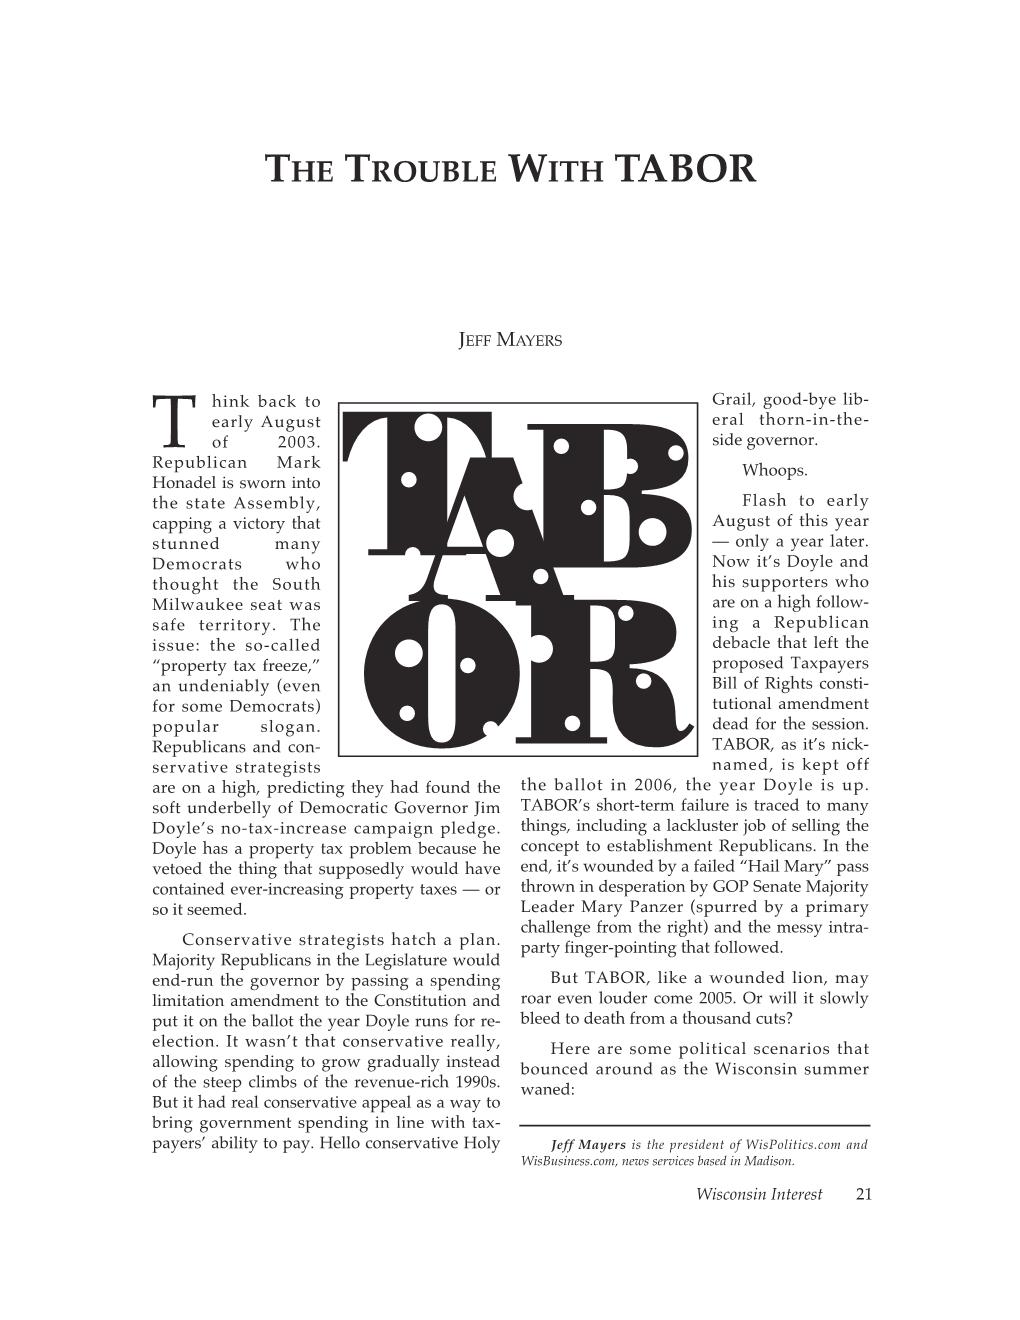 The Trouble with Tabor